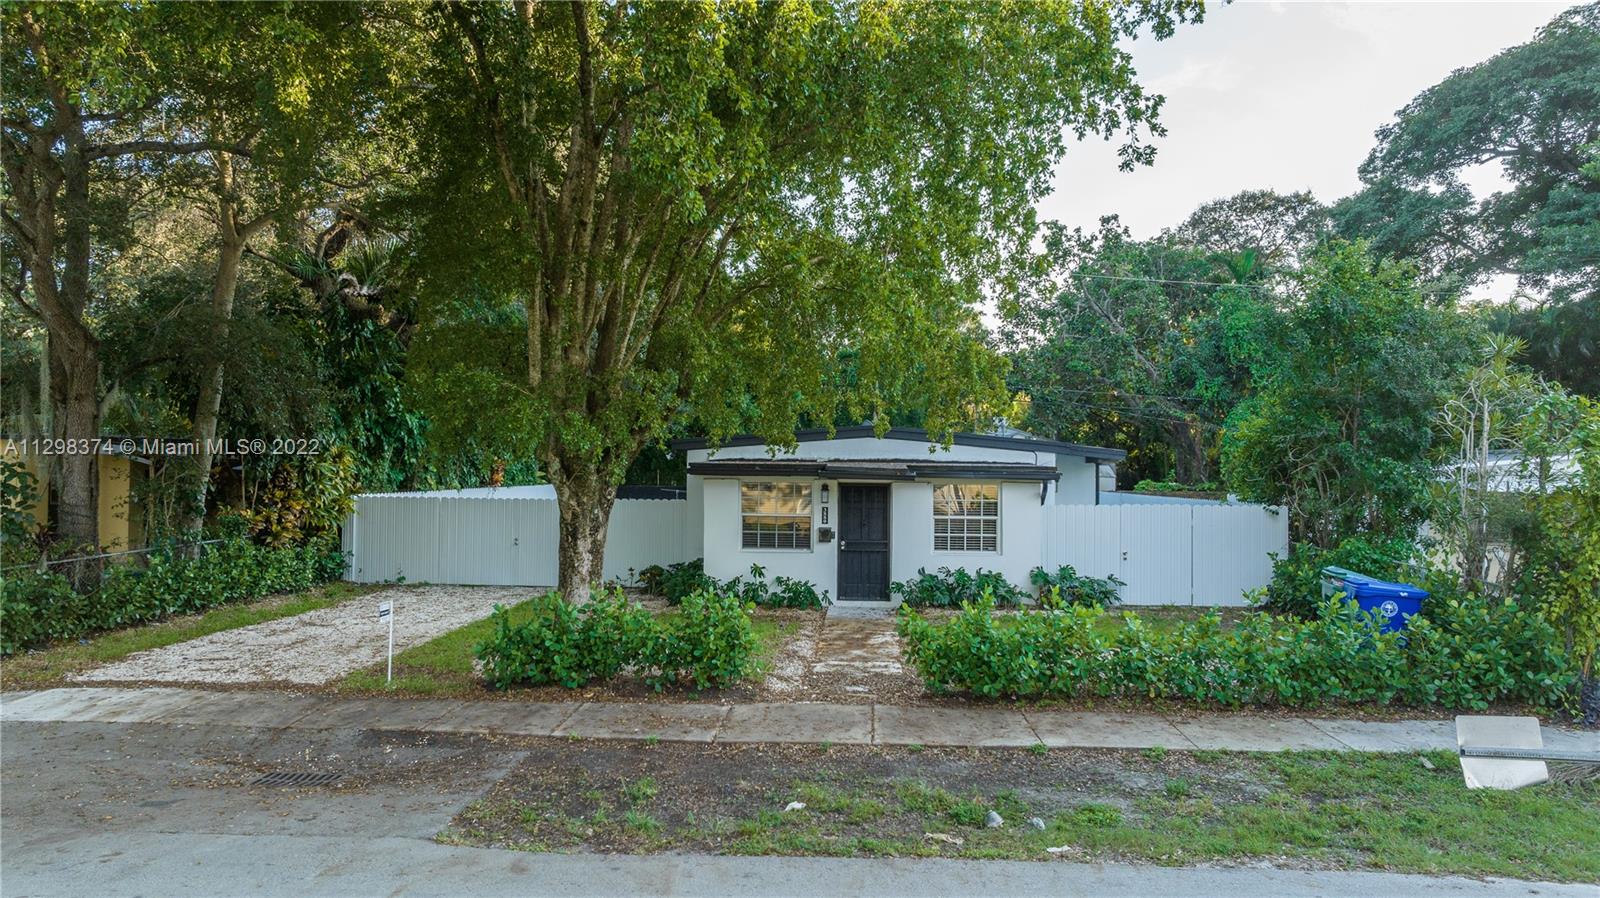 GREAT OPPORTUNITY FOR INVESTORS IN ONE OF MIAMI'S HOTTEST AREAS - OPPORTUNITY ZONE - T3-R - Fully remodeled 2/1 single family home in Coconut Grove. CBS construction on a large lot. Conveniently located in an A+ school district with acclaimed international studies programs. Within a mile from all shops, restaurants, bars & entertainment.